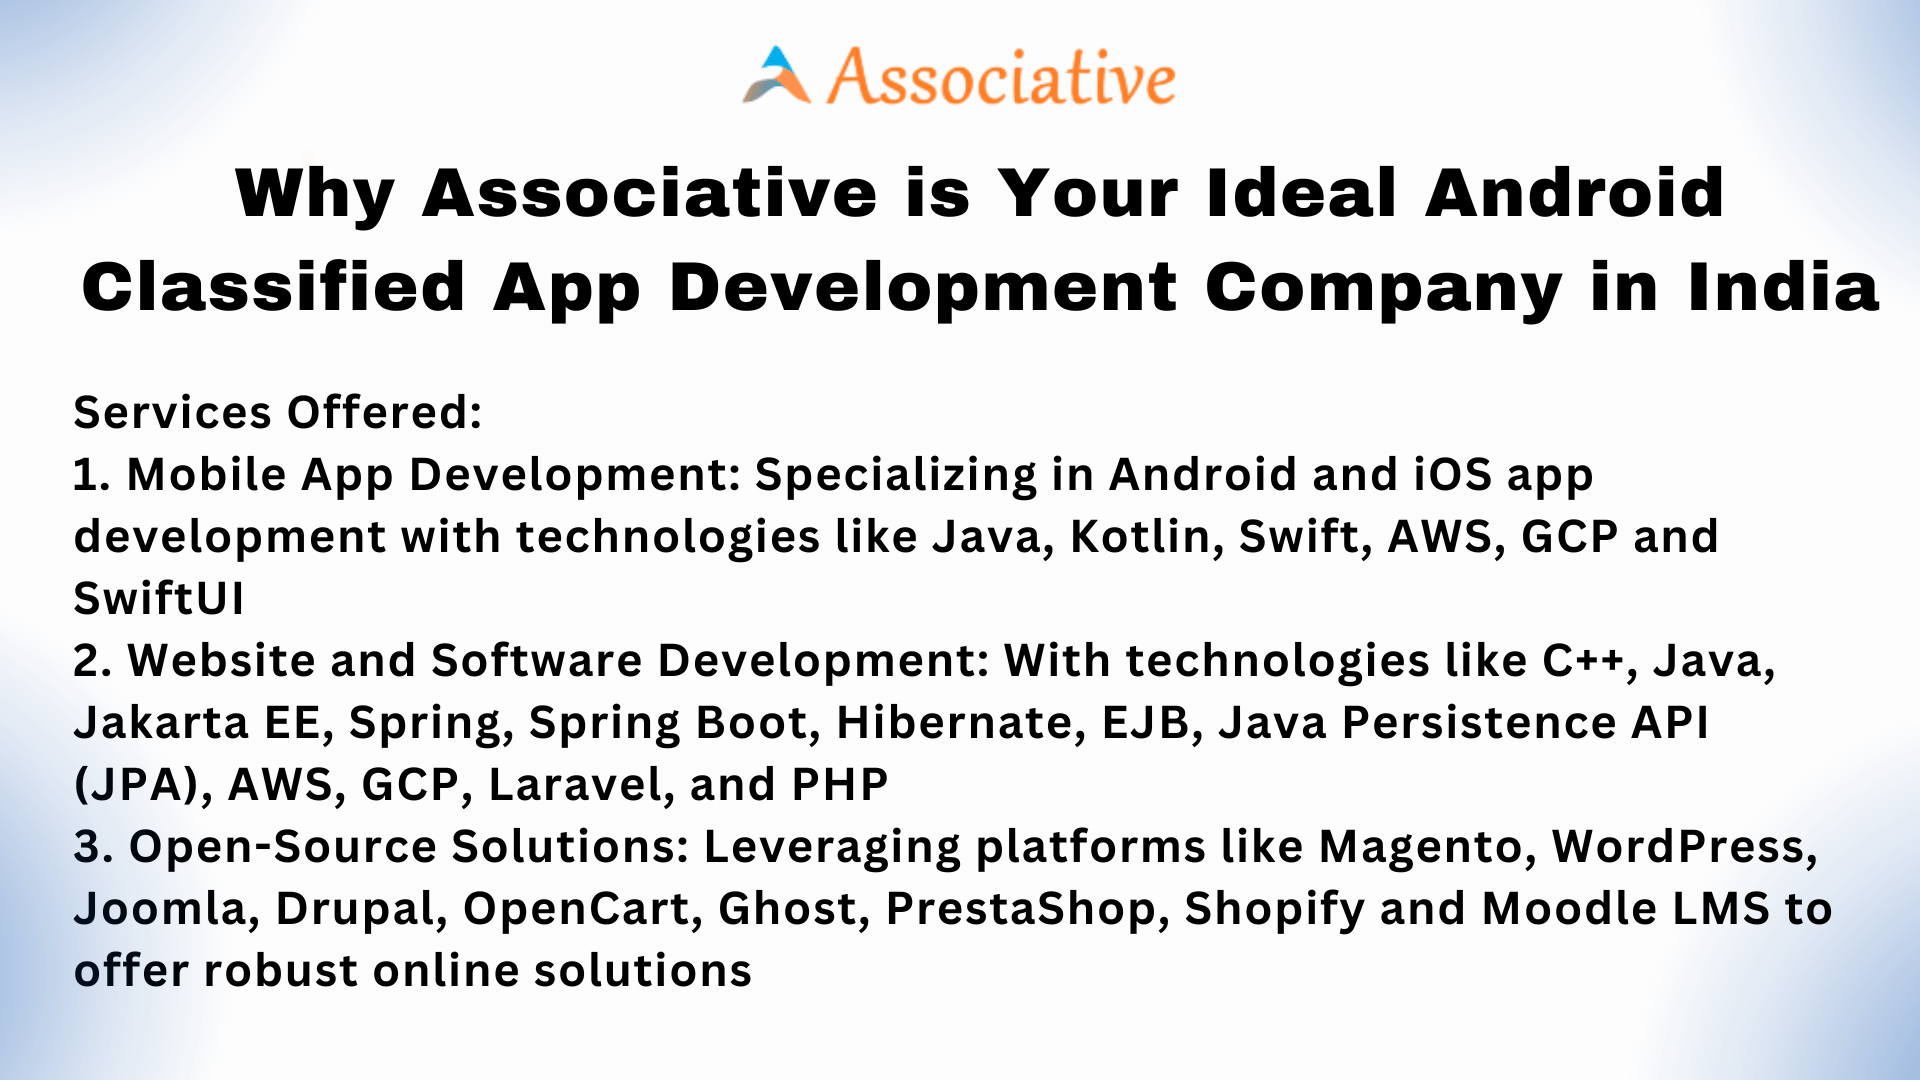 Why Associative is Your Ideal Android Classified App Development Company in India